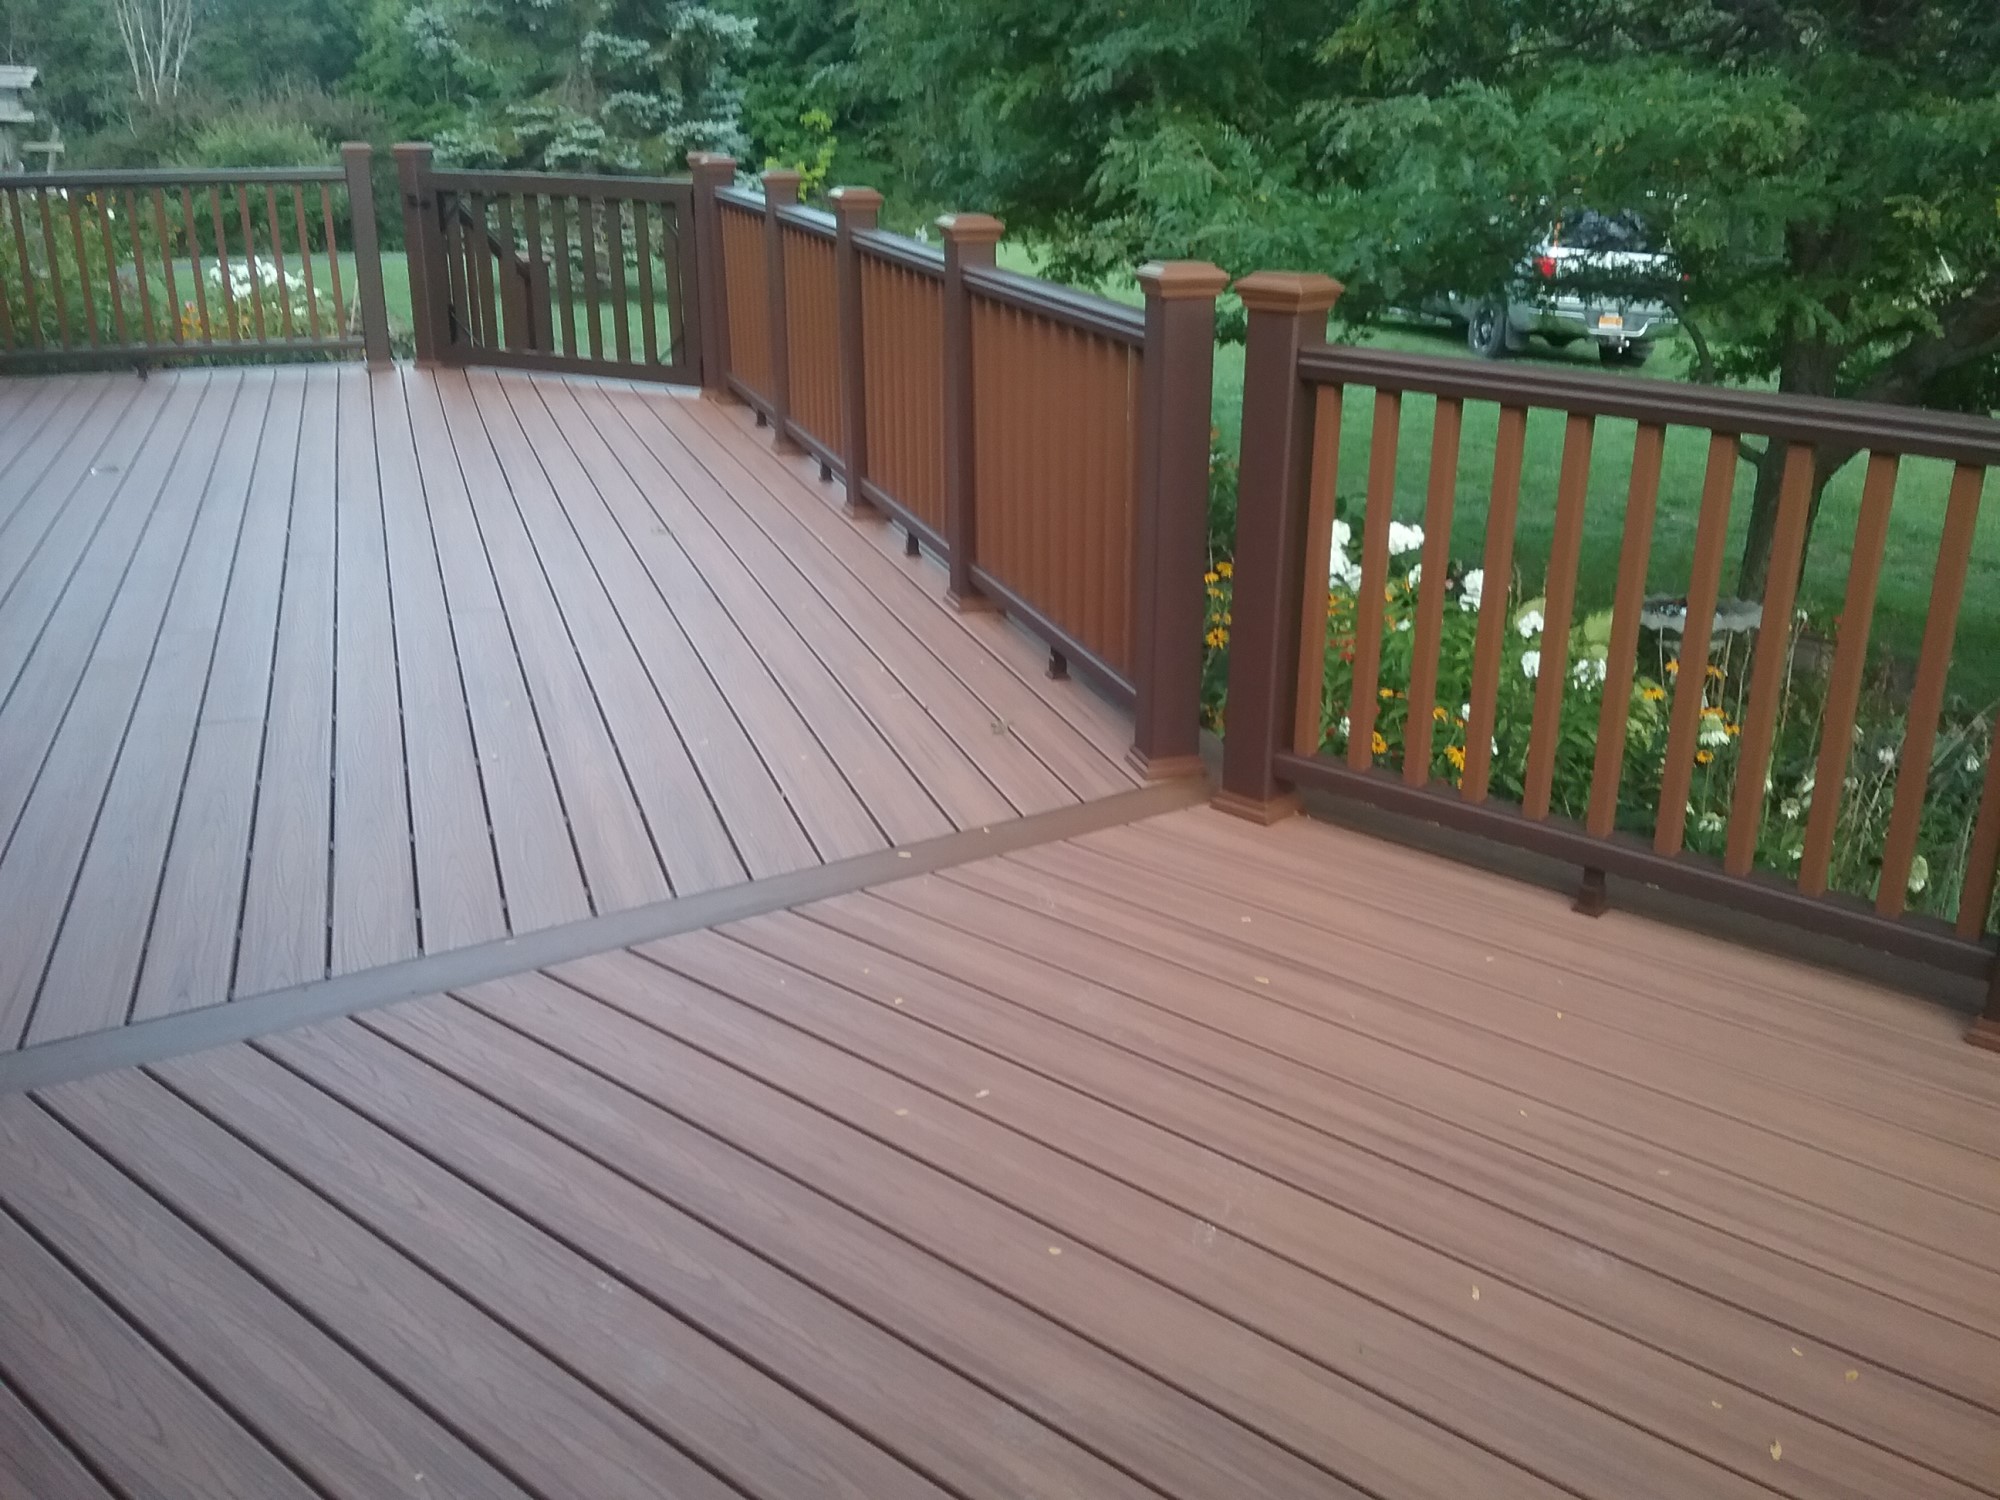 Revamping Your Outdoor Space: Deck Design Ideas from Chaffee Construction